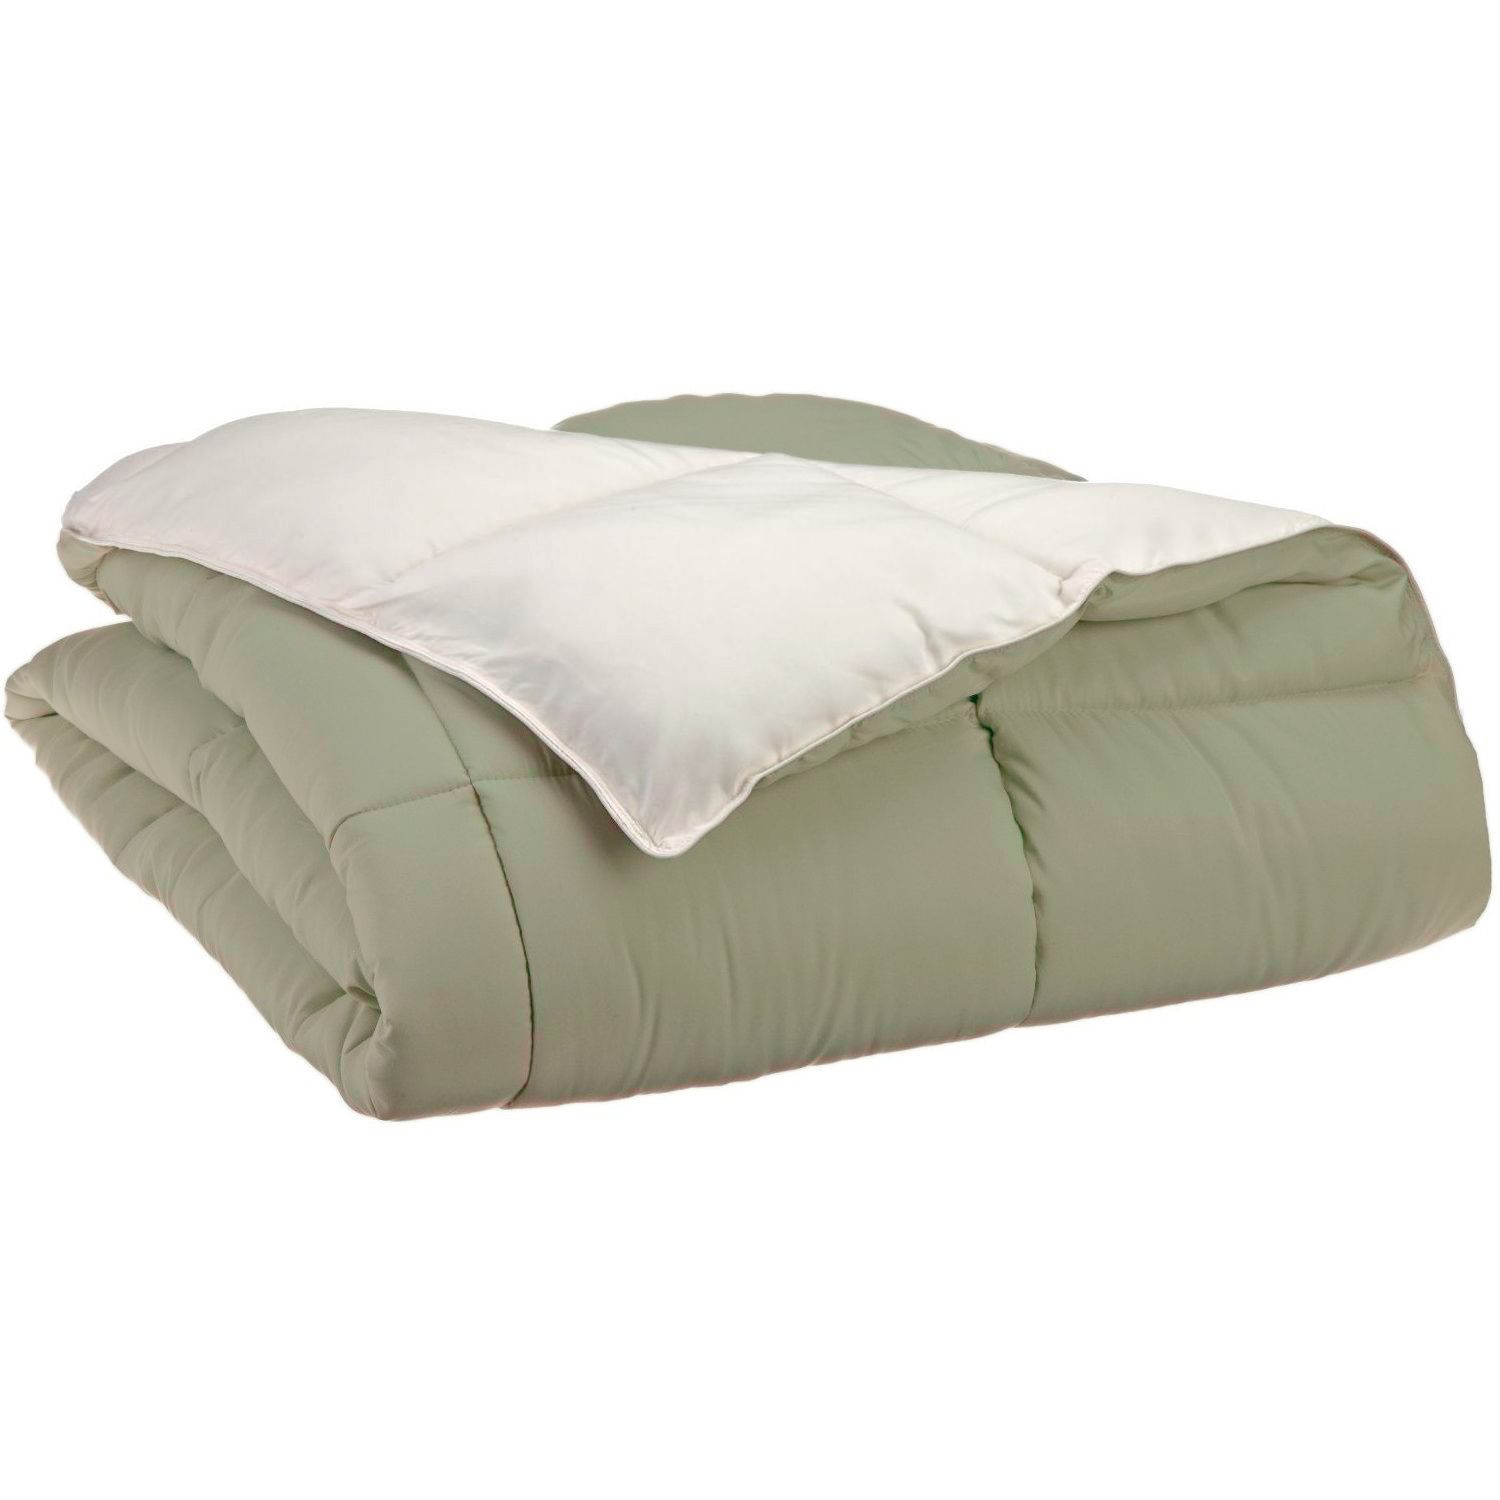 Superior Down Alternative Reversible Comforter, Full/ Queen, Ivory/ Sage - image 1 of 4